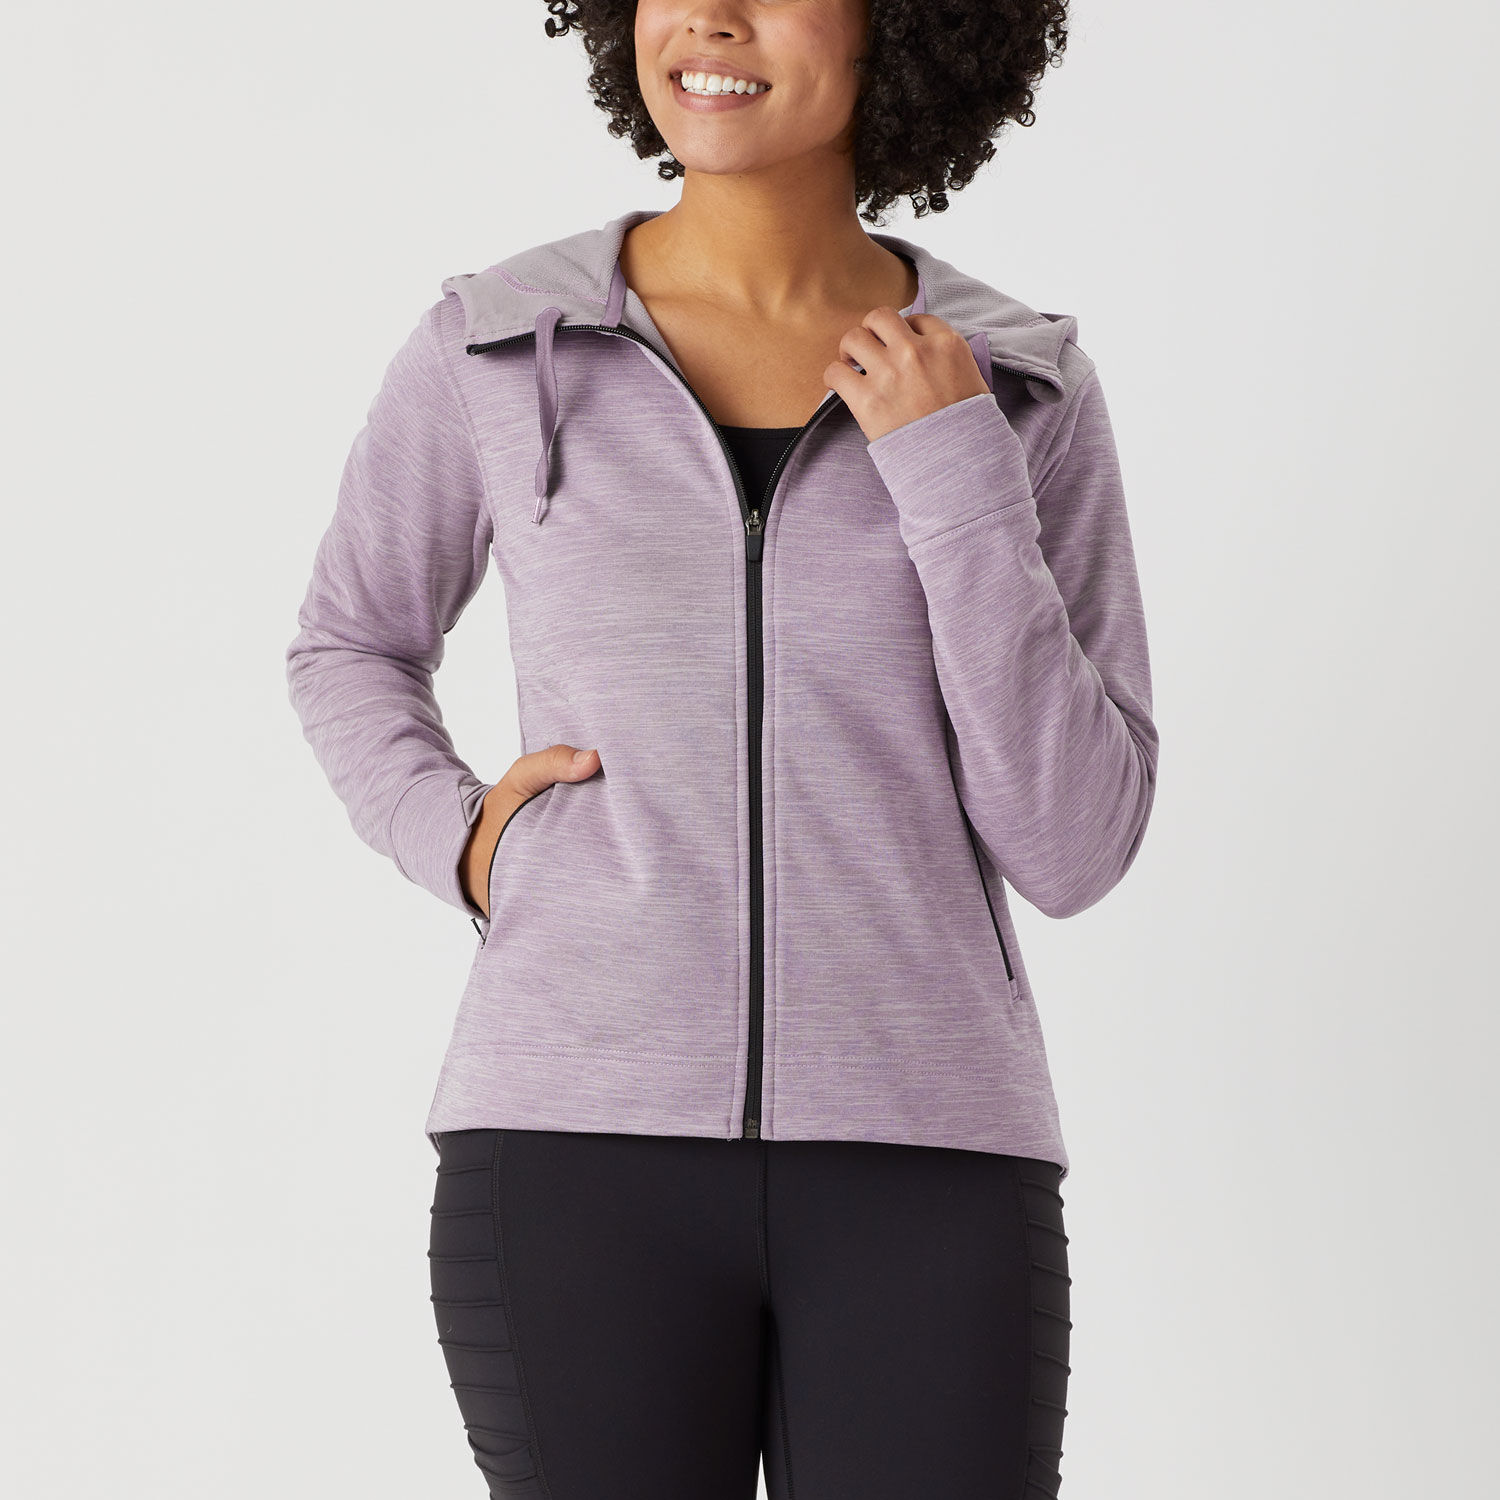 Women's Synthetic Snagstop Hoodie | Duluth Trading Company